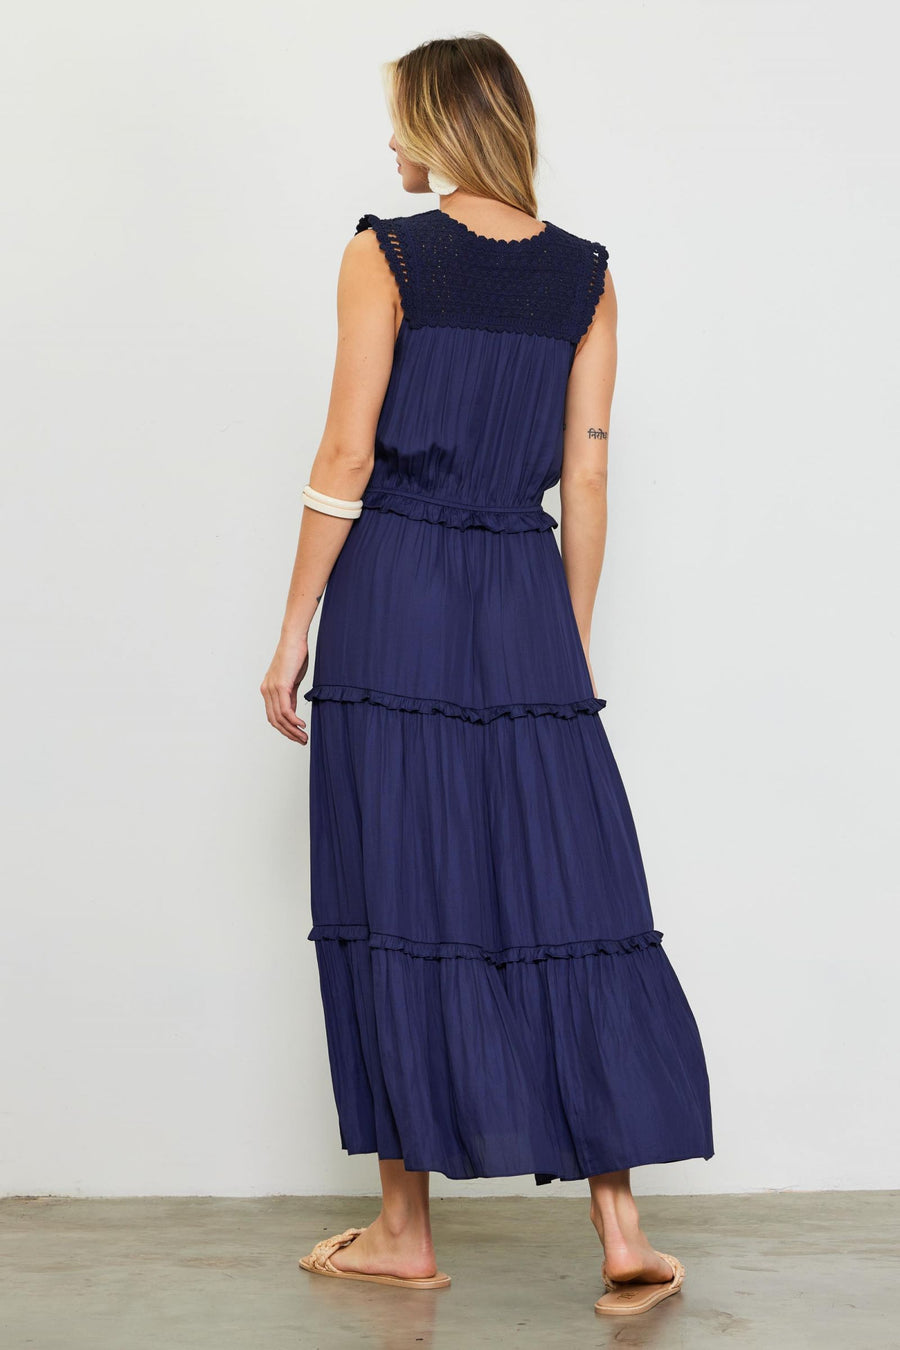 Skies Are Blue Navy Crochet Tiered Maxi Dress